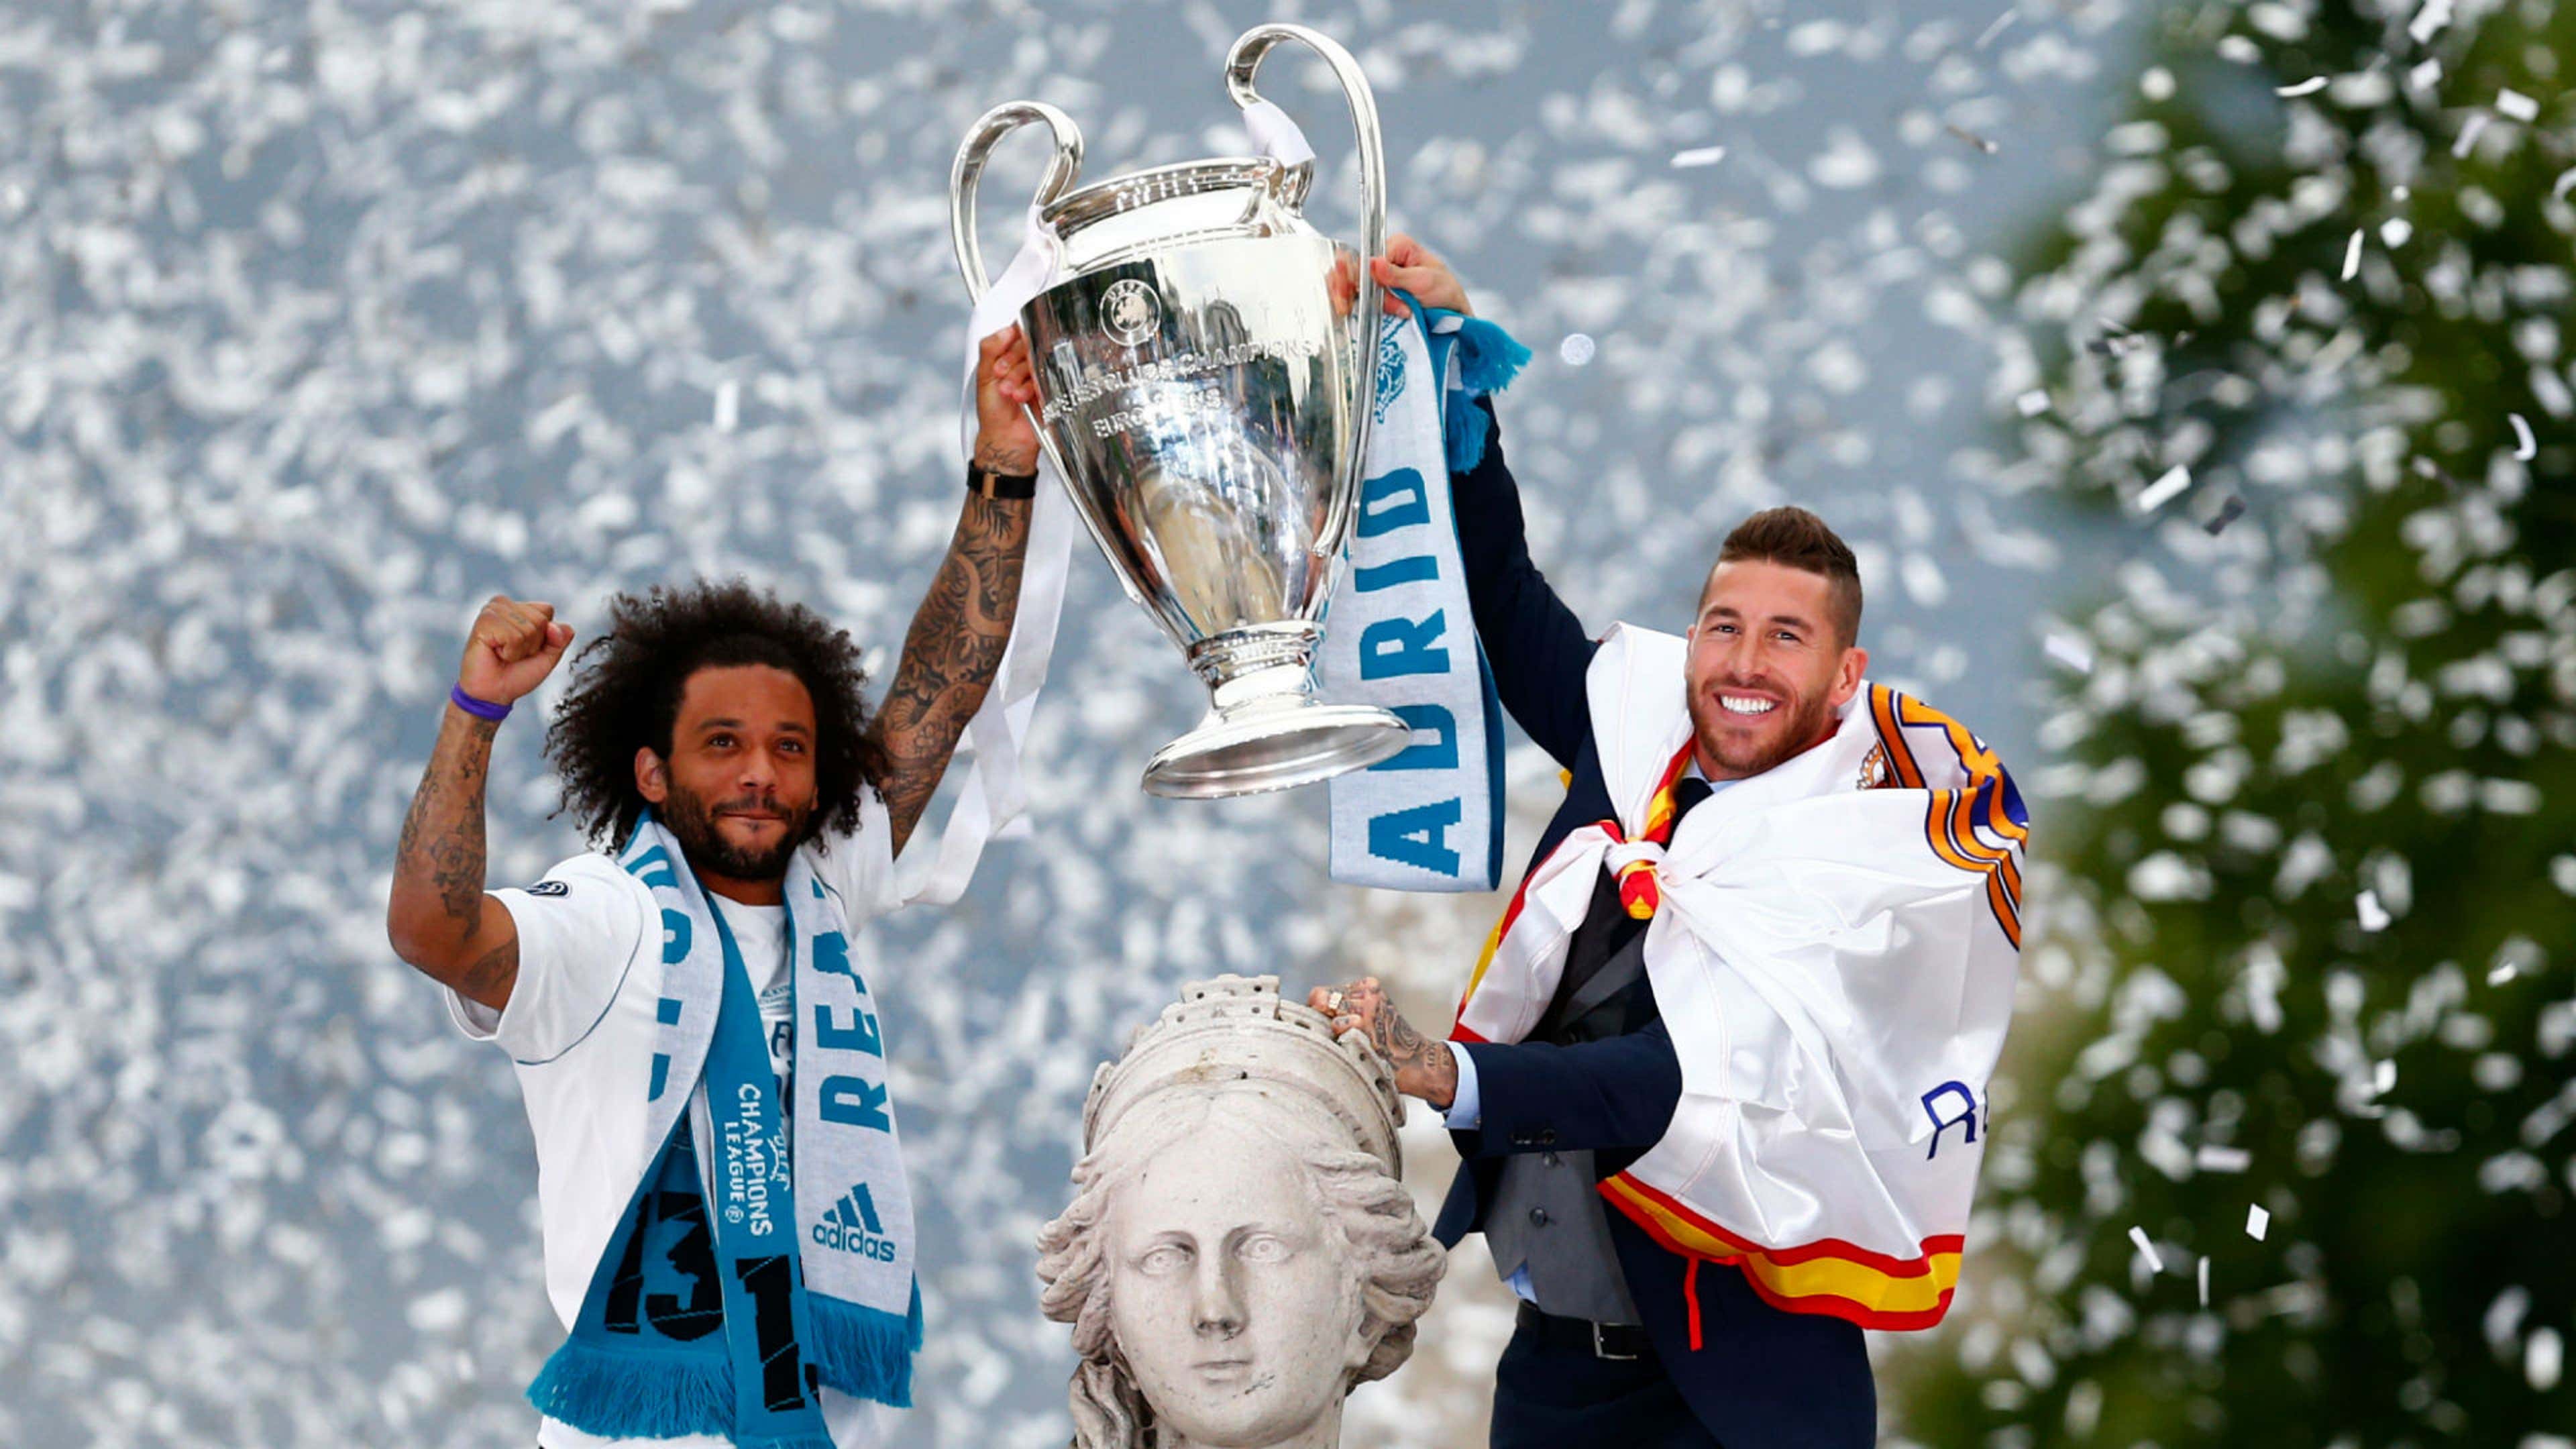 Marcelo Sergio Ramos Real Madrid Champions League trophy 2018